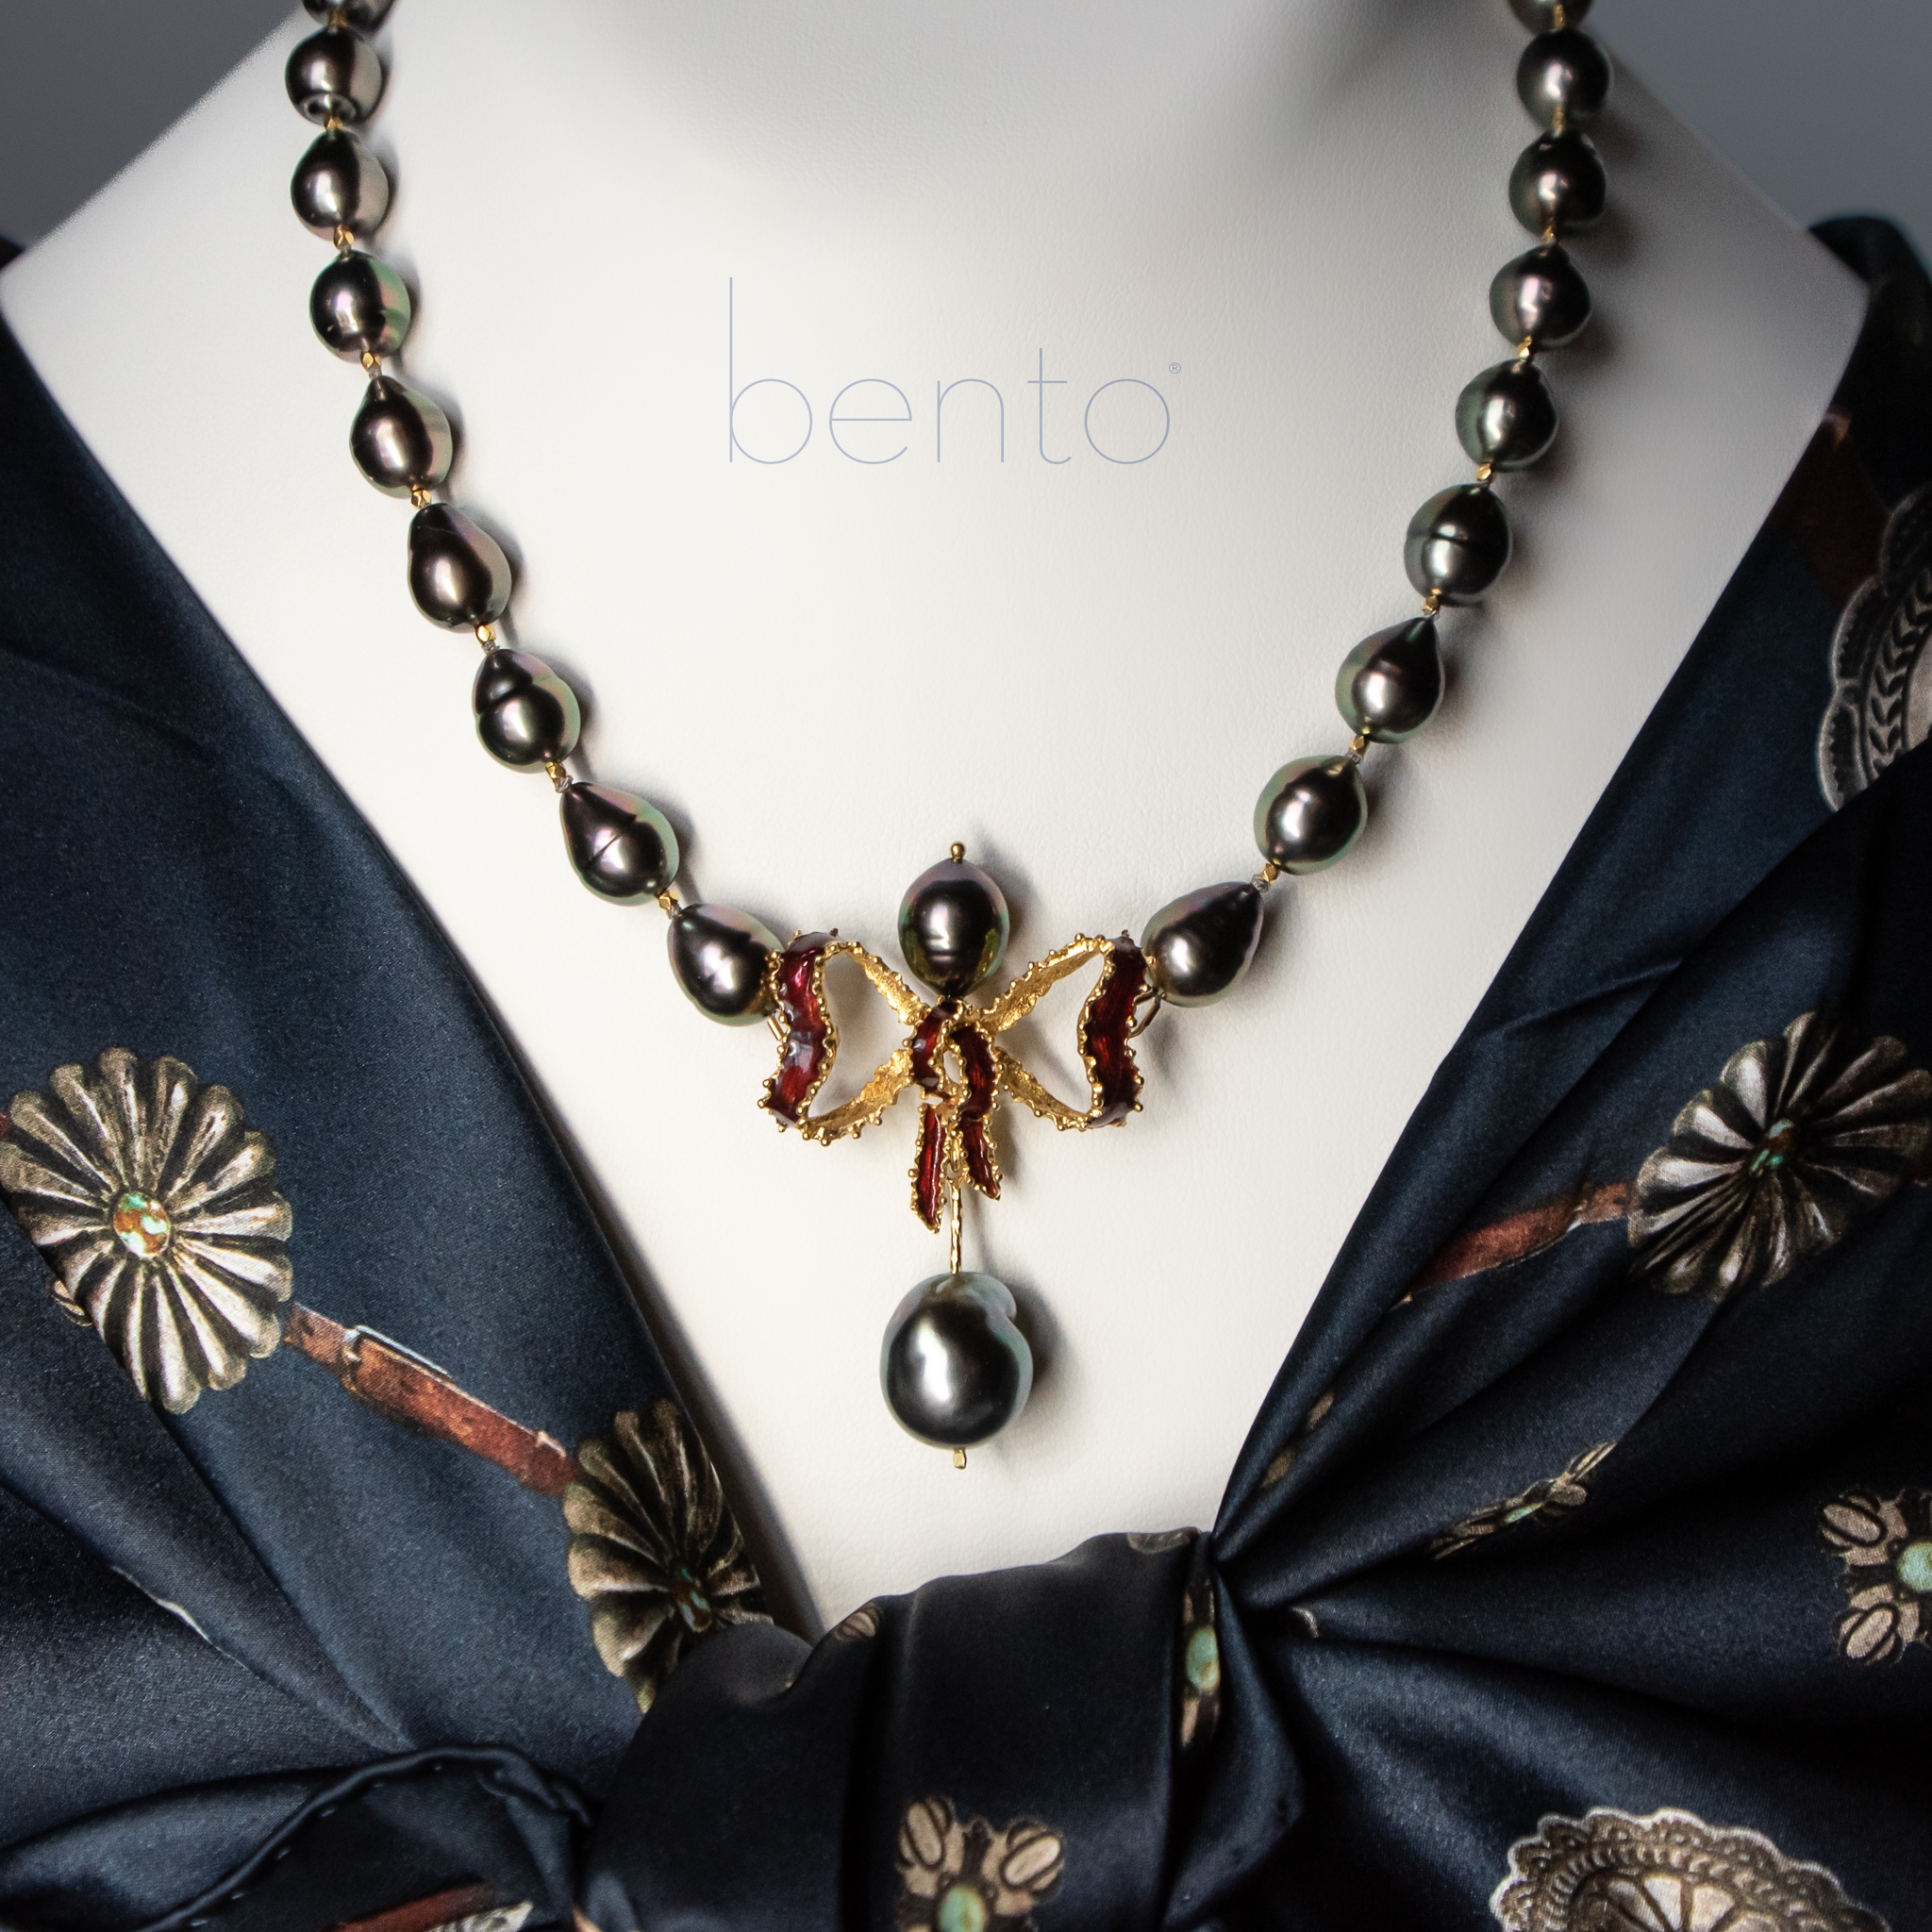 Tahitian gray pearl necklace with peacock overtones and Italian 18K gold enameled bow pendant